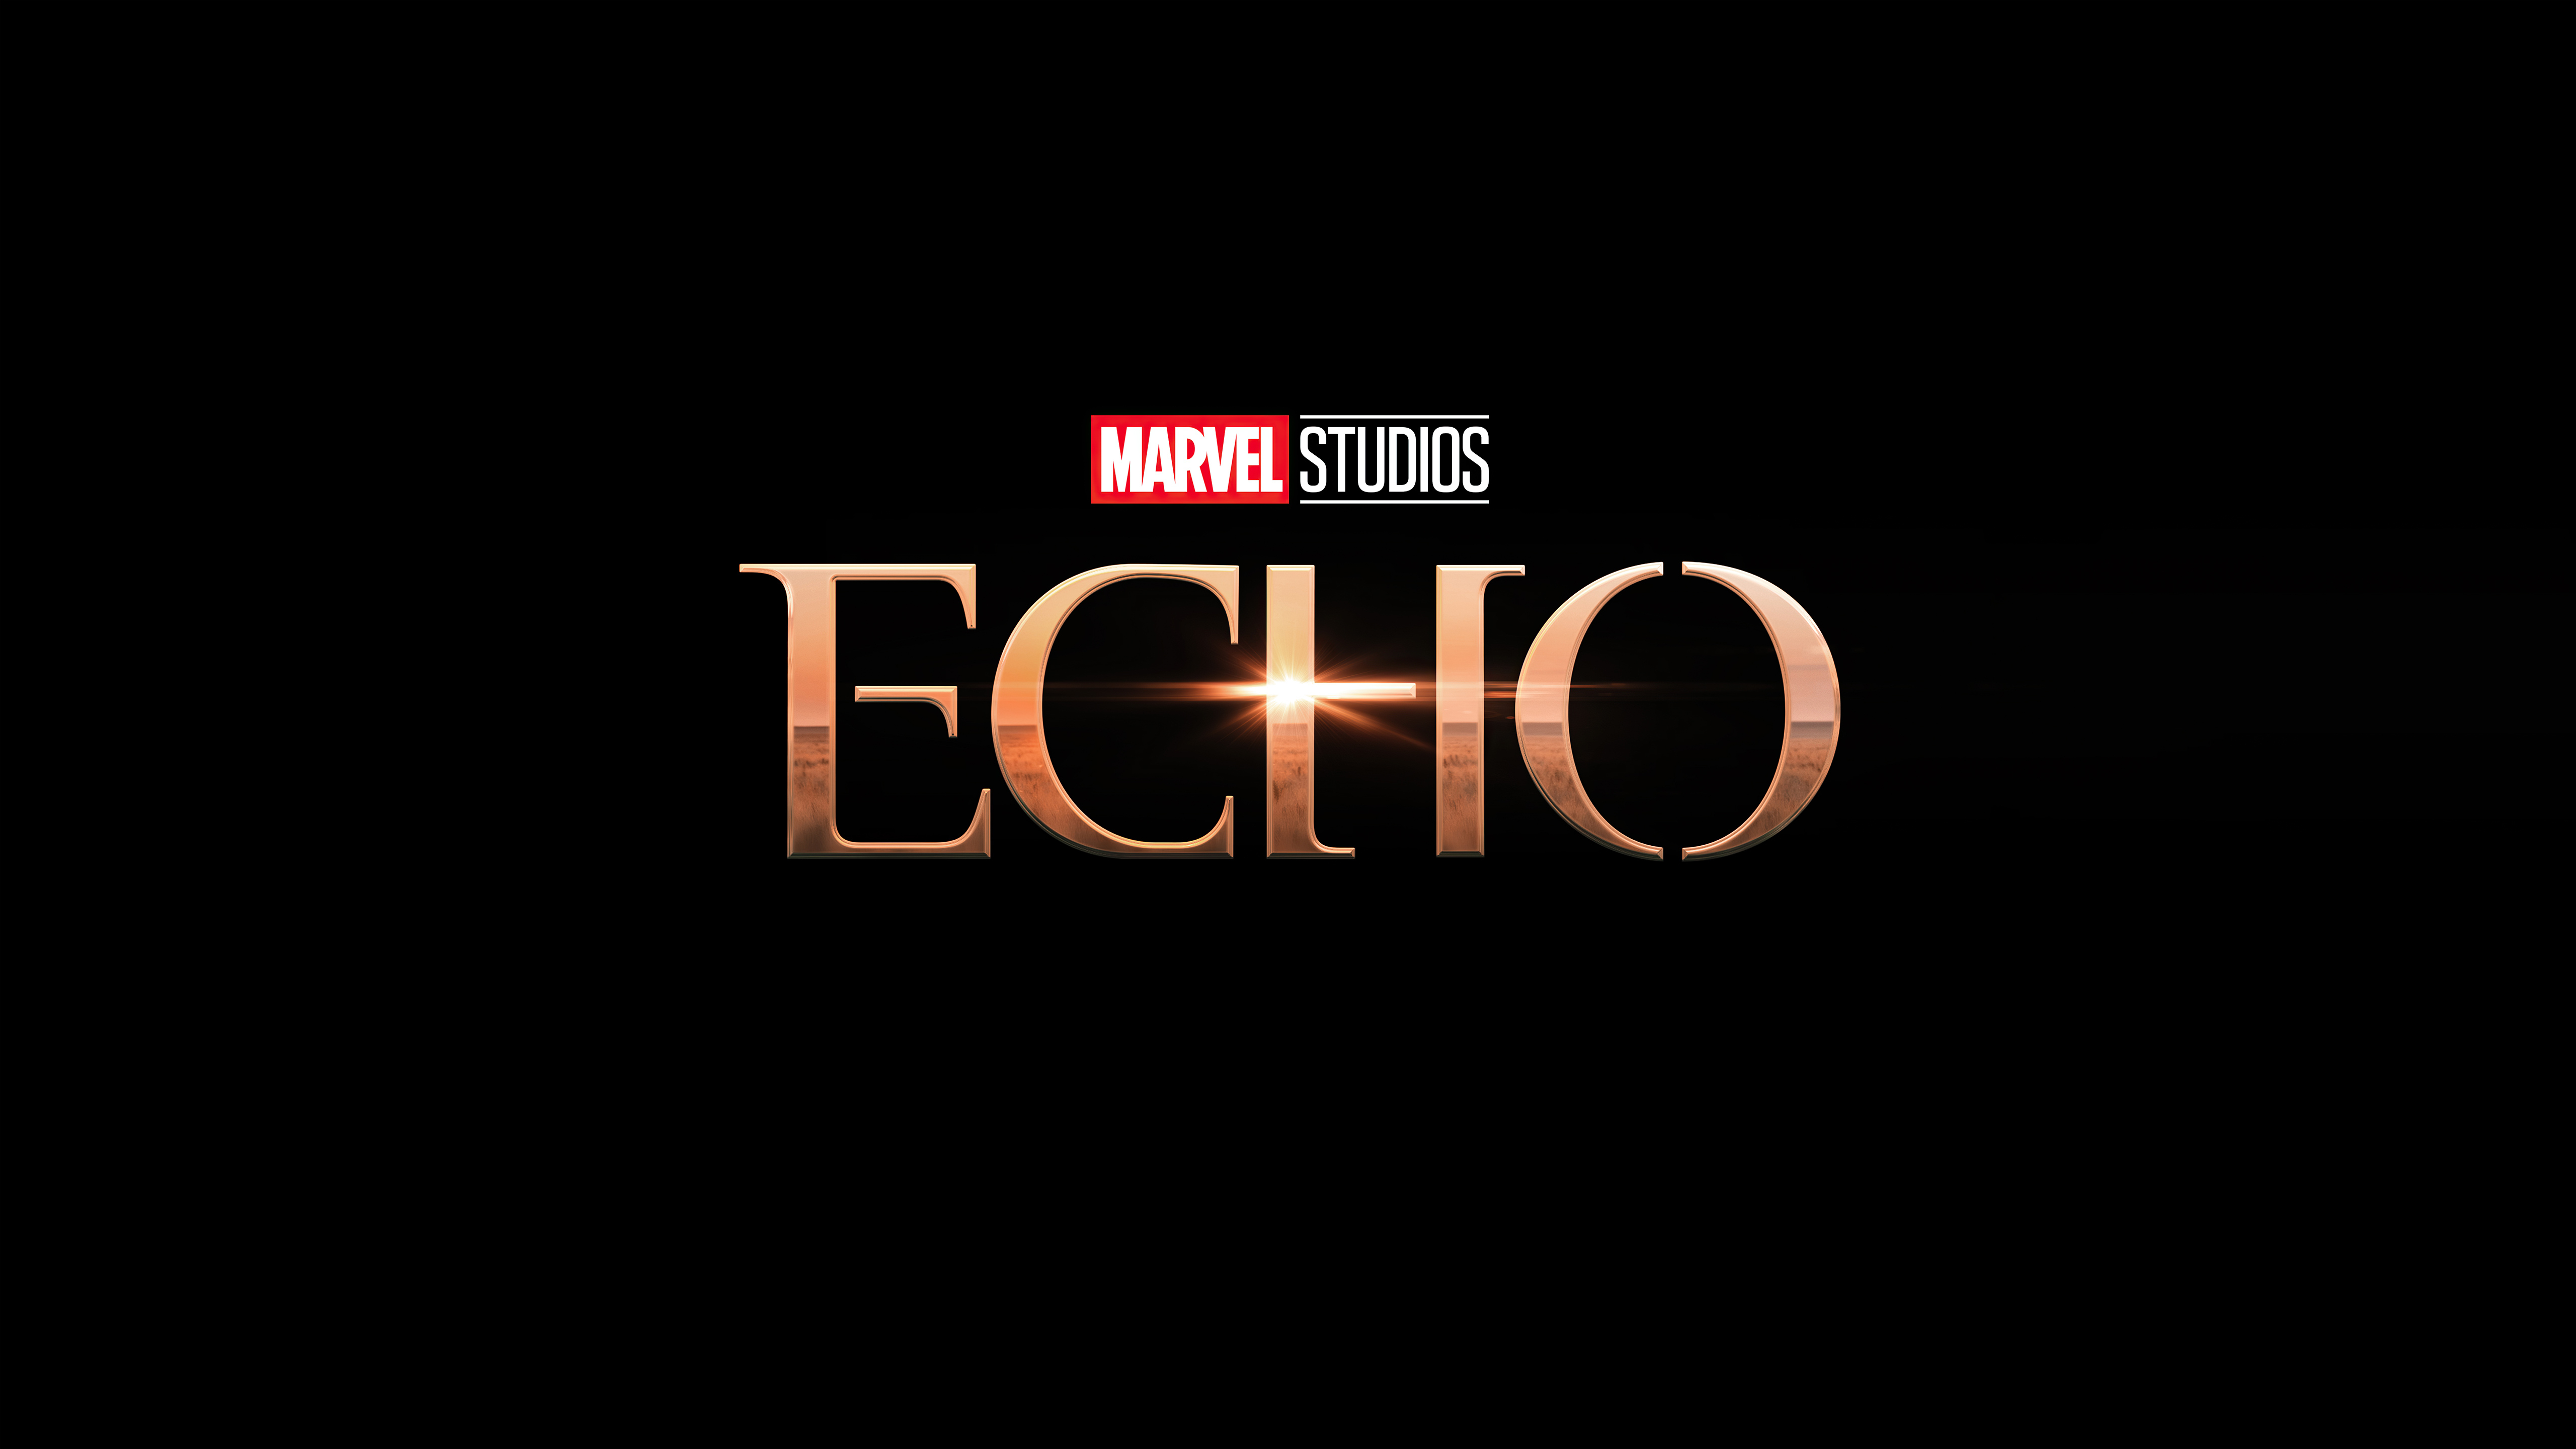 Echo 4k Marvel Disney Poster Wallpaper, HD TV Series 4K Wallpapers, Images  and Background - Wallpapers Den